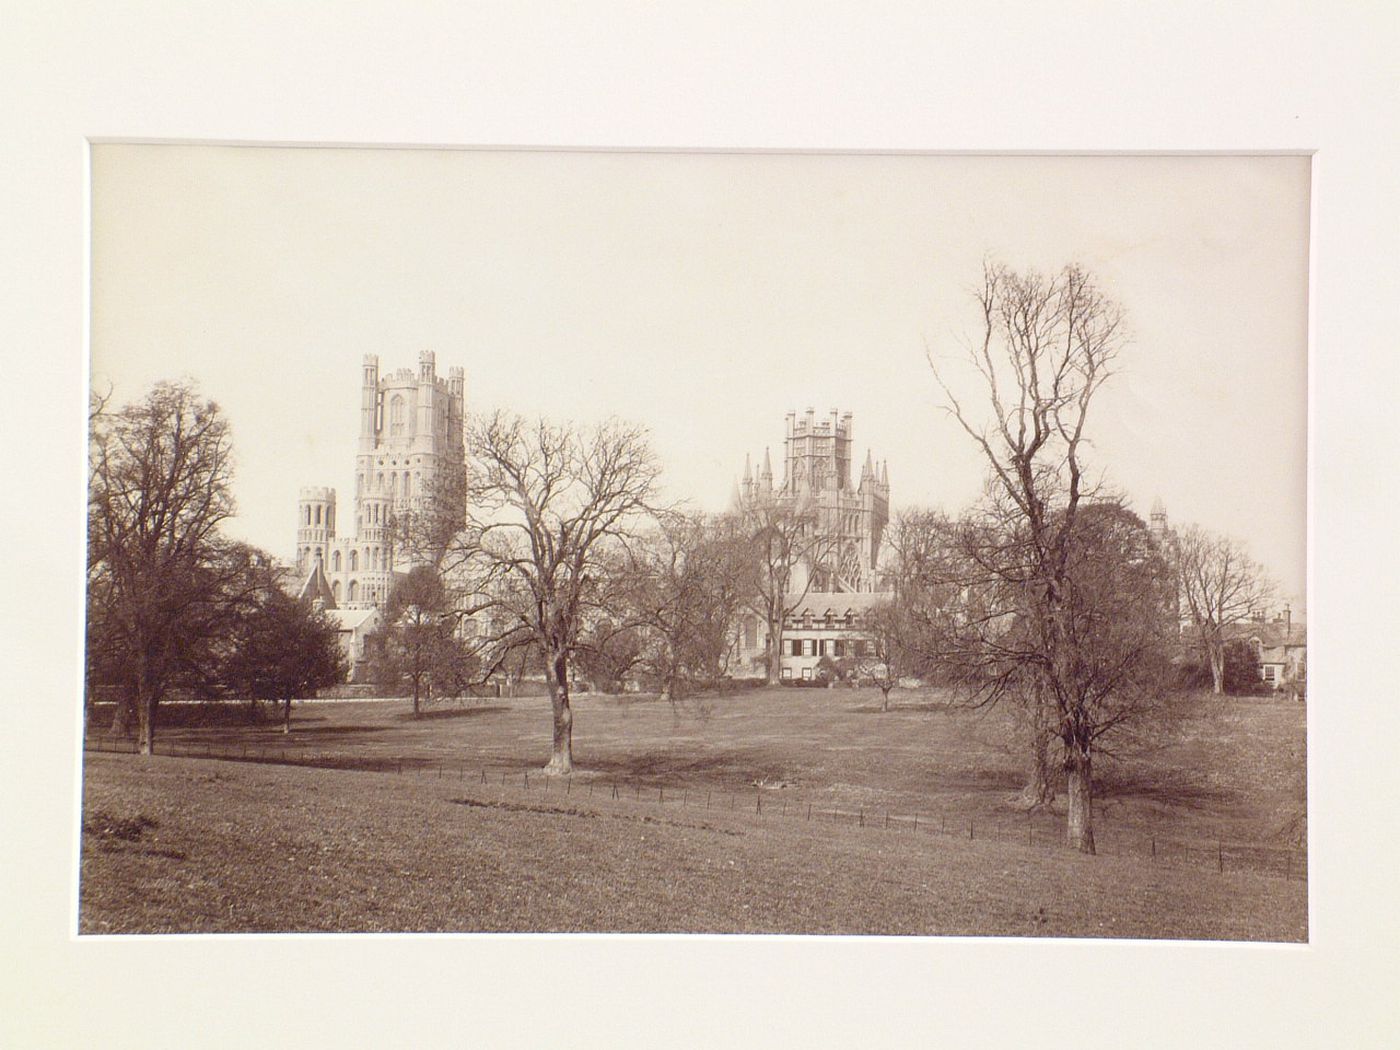 Distant view of Ely Cathedral, partially obscured by trees, Ely, England